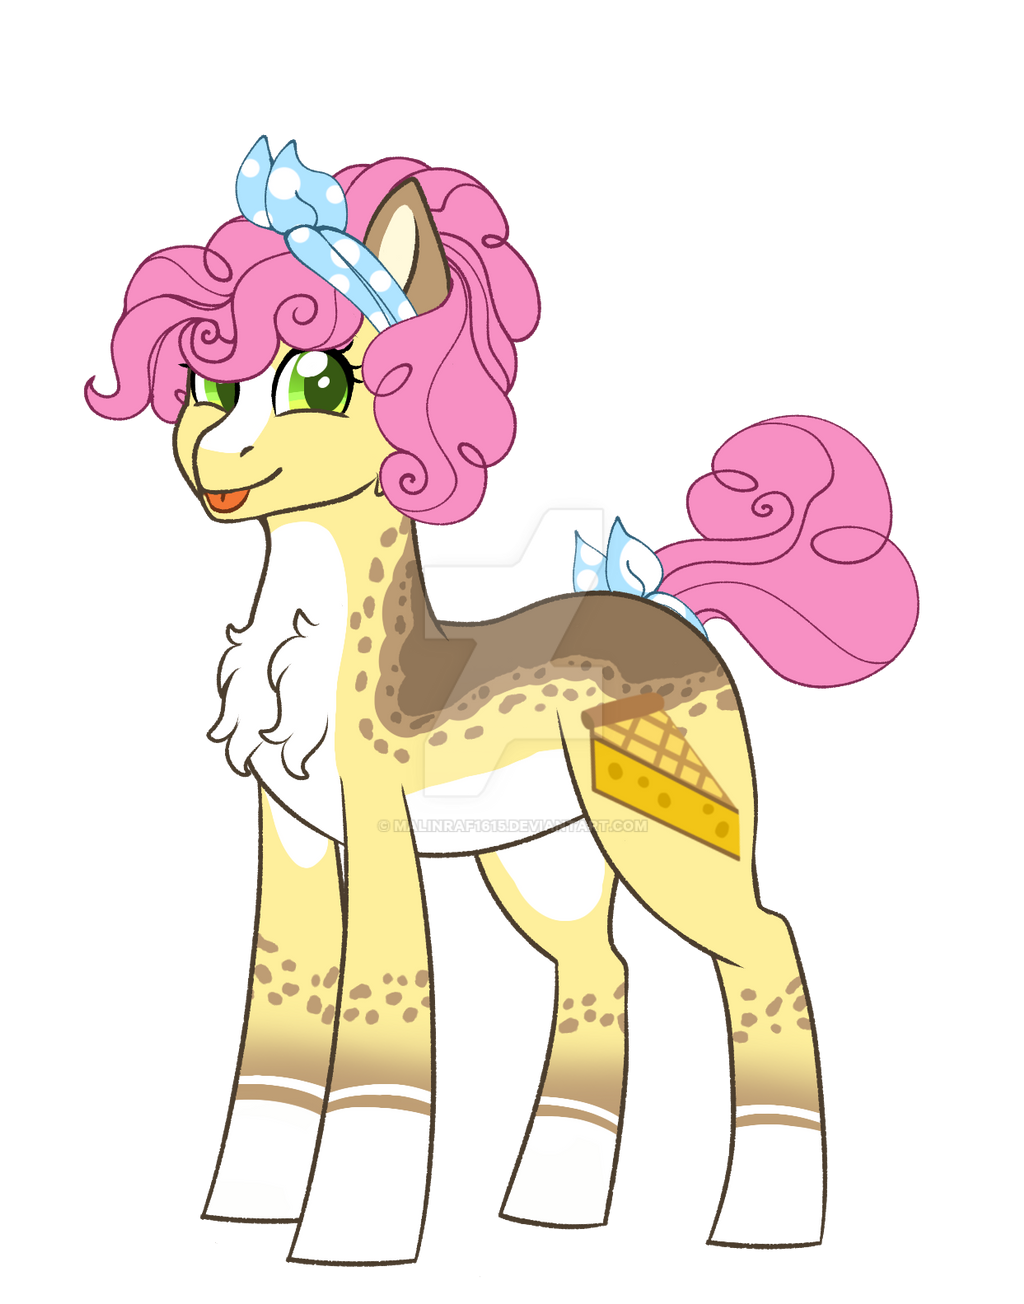 MLP Style: Lil' Cheese by MalinRaf1615 on DeviantArt